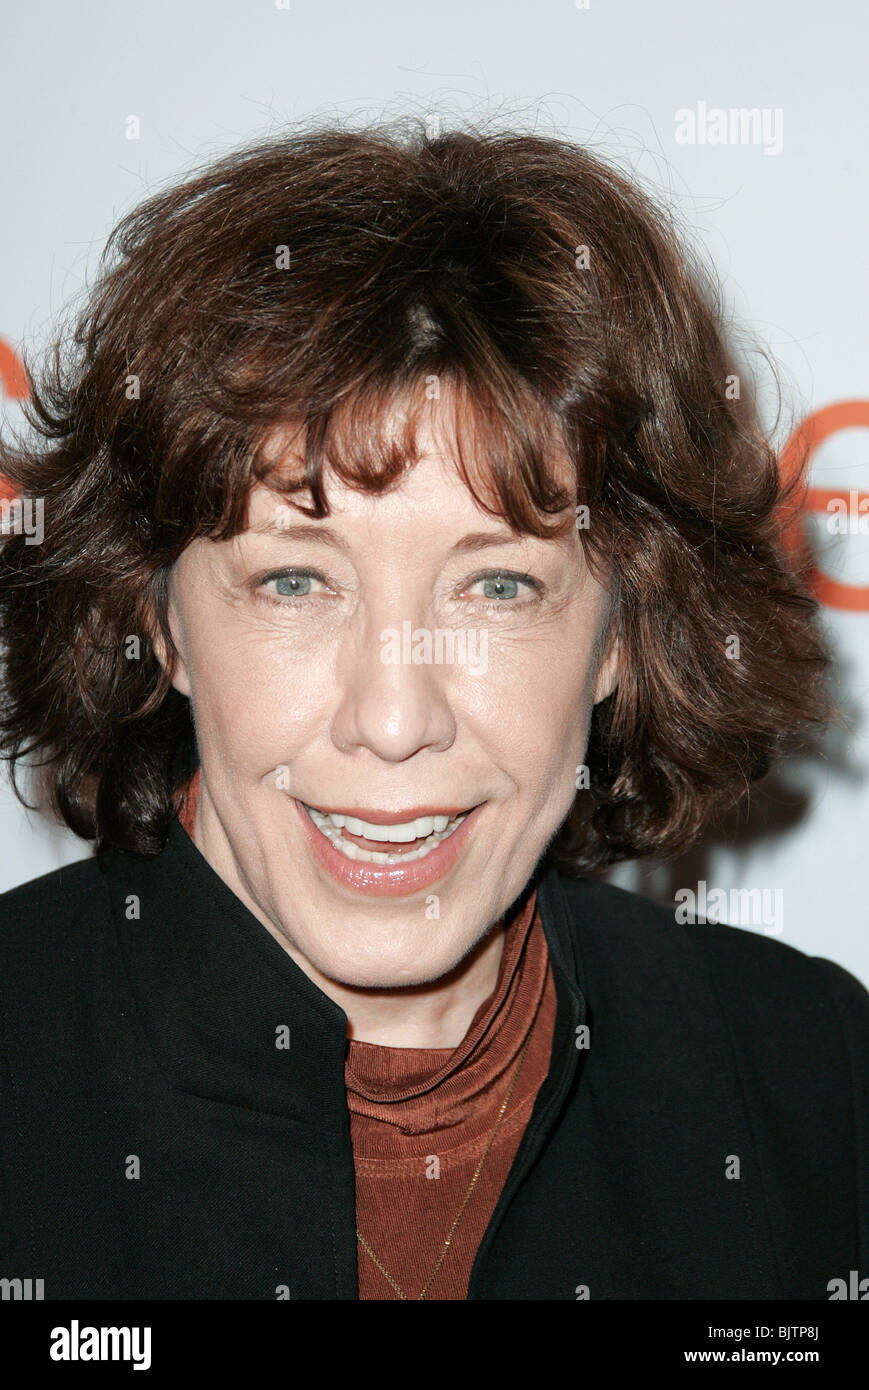 Tomlin pics lily young Lily Tomlin